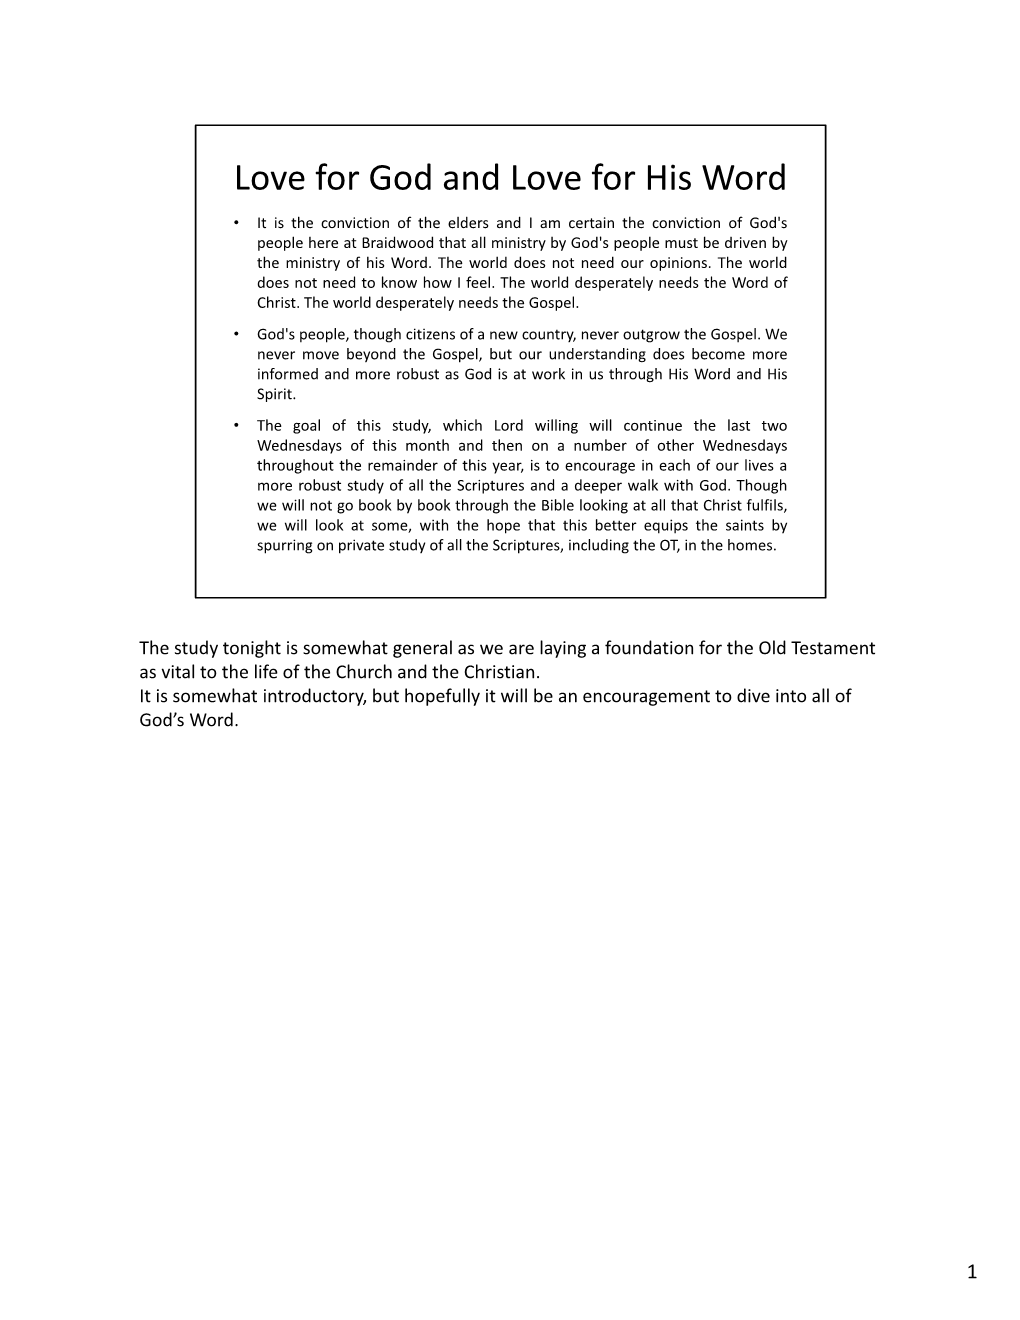 Love for God and Love for His Word